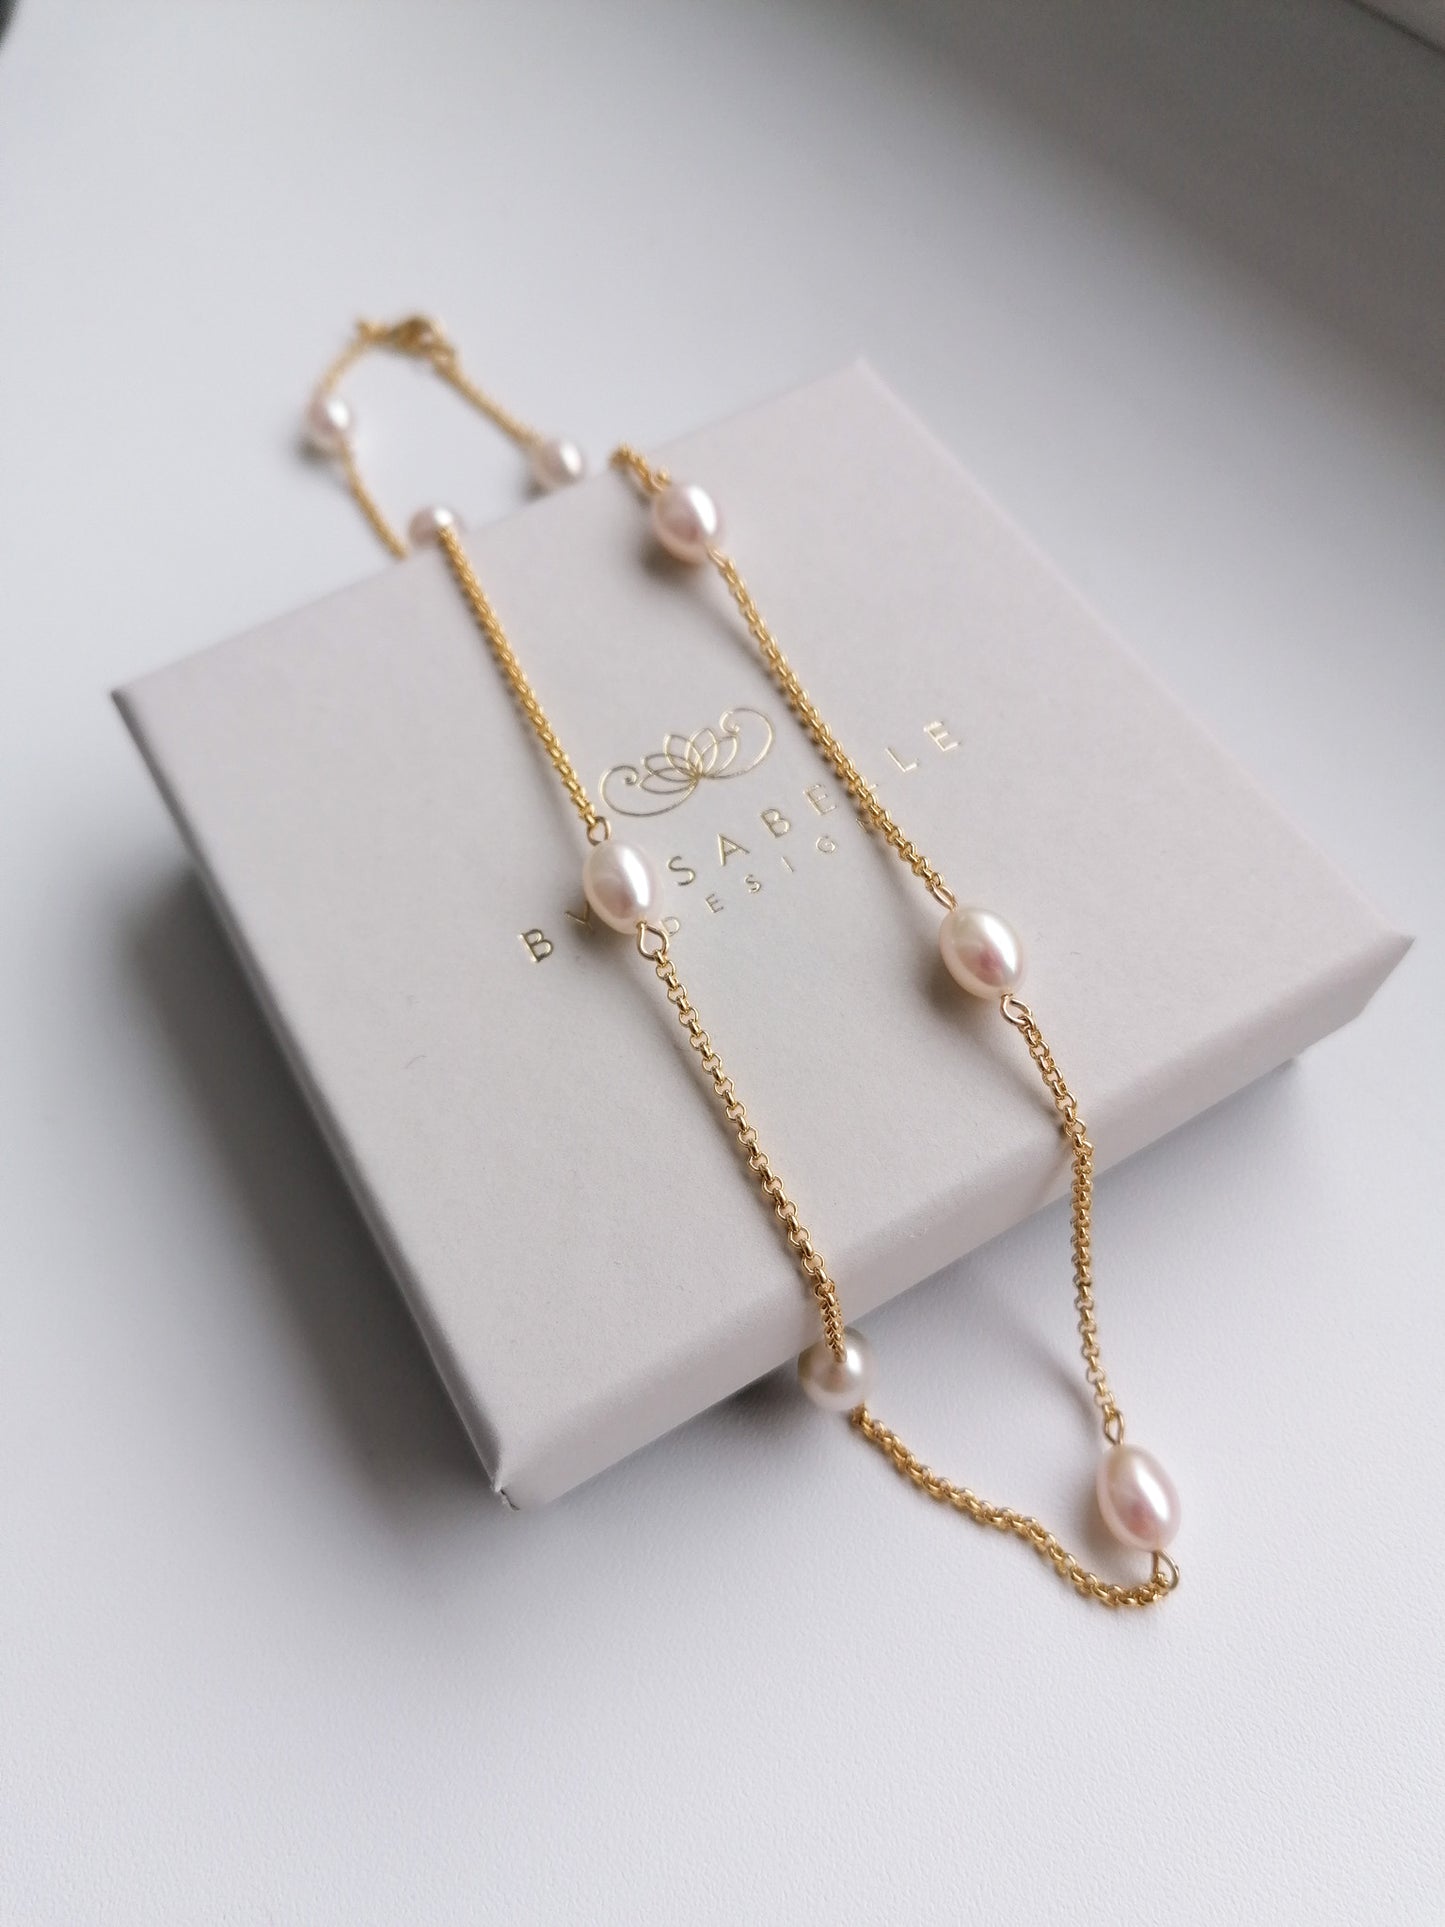 July necklace - gold filled